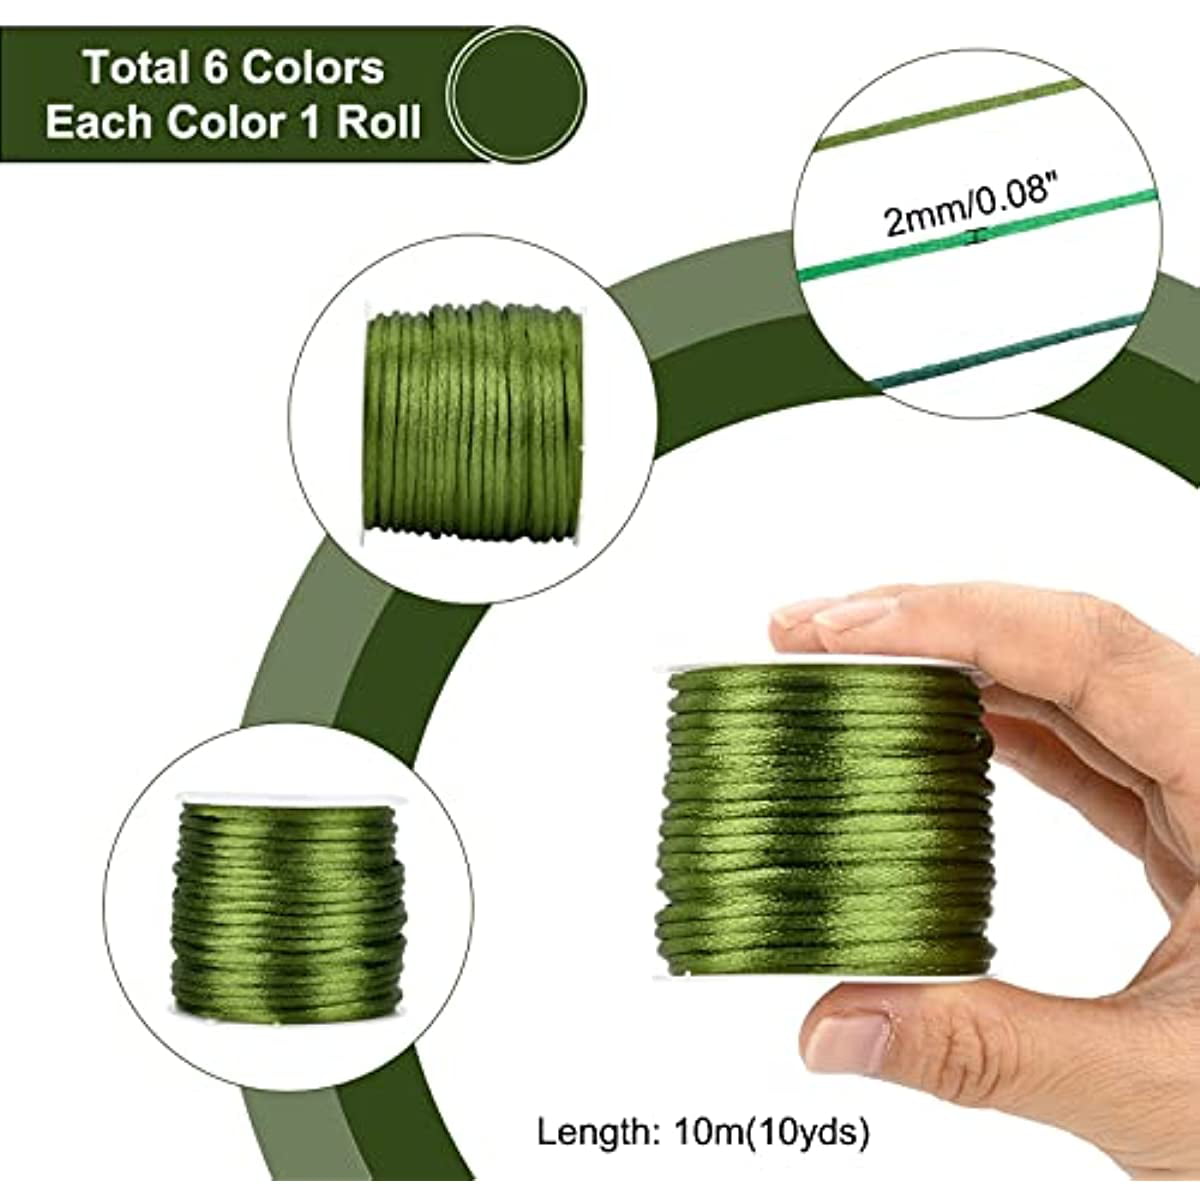 Christmas Tree Beading String Diff 20M Satin Nylon Trim Cord For Necklace  From Amybabe, $1.47